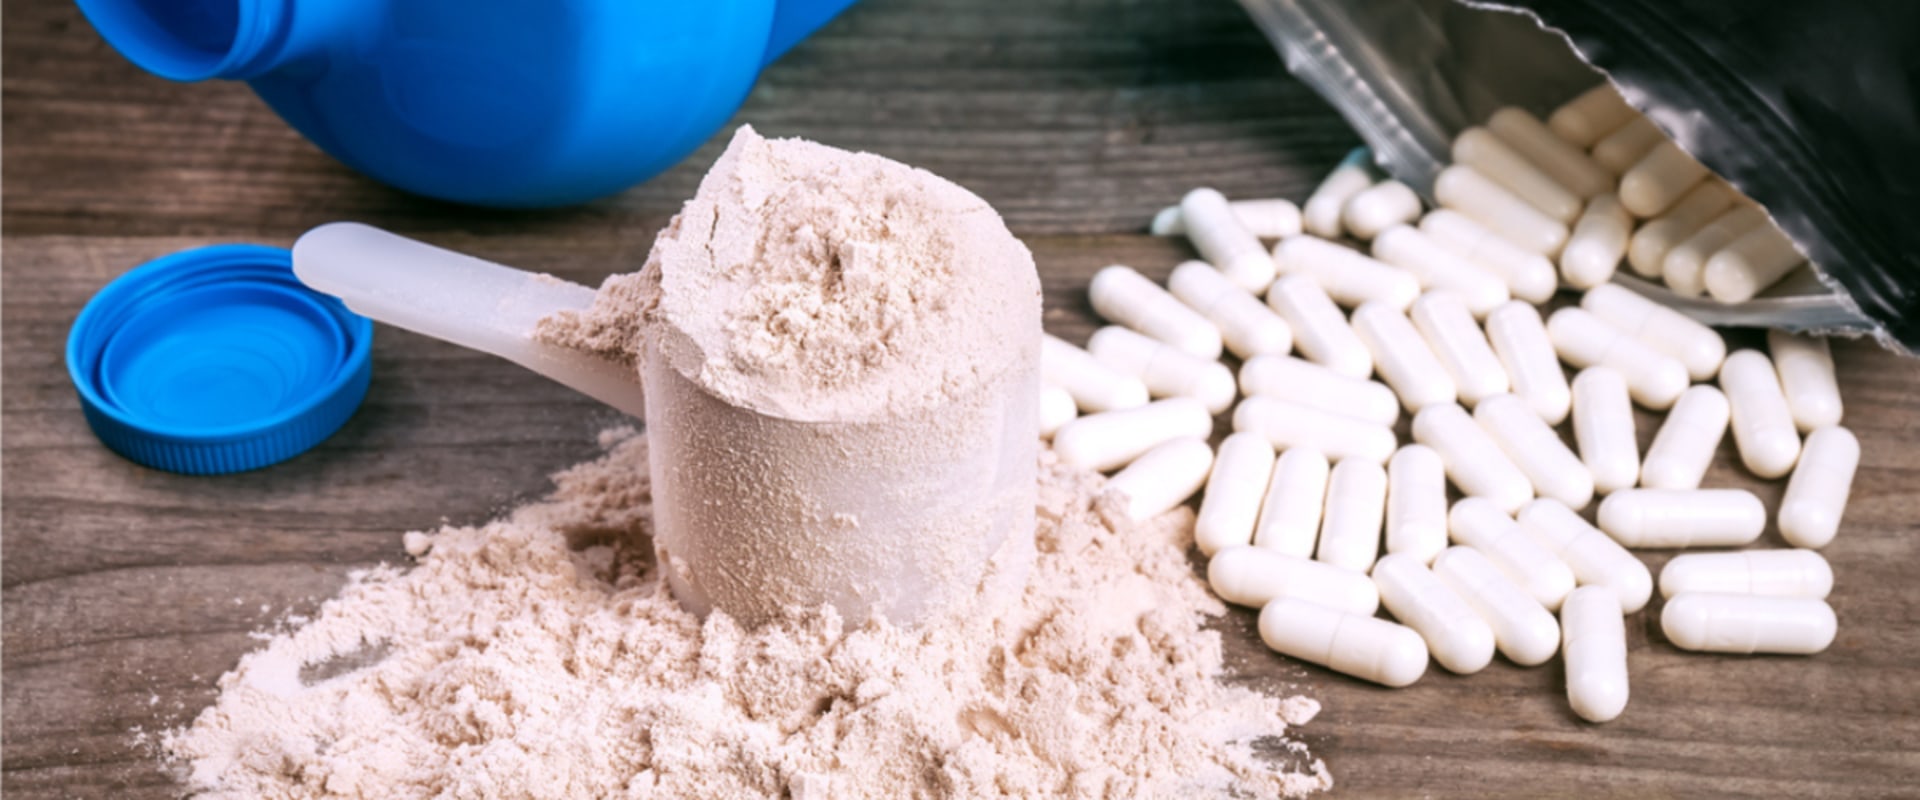 Are Dietary Supplements Effective for Weight Loss? A Comprehensive Look